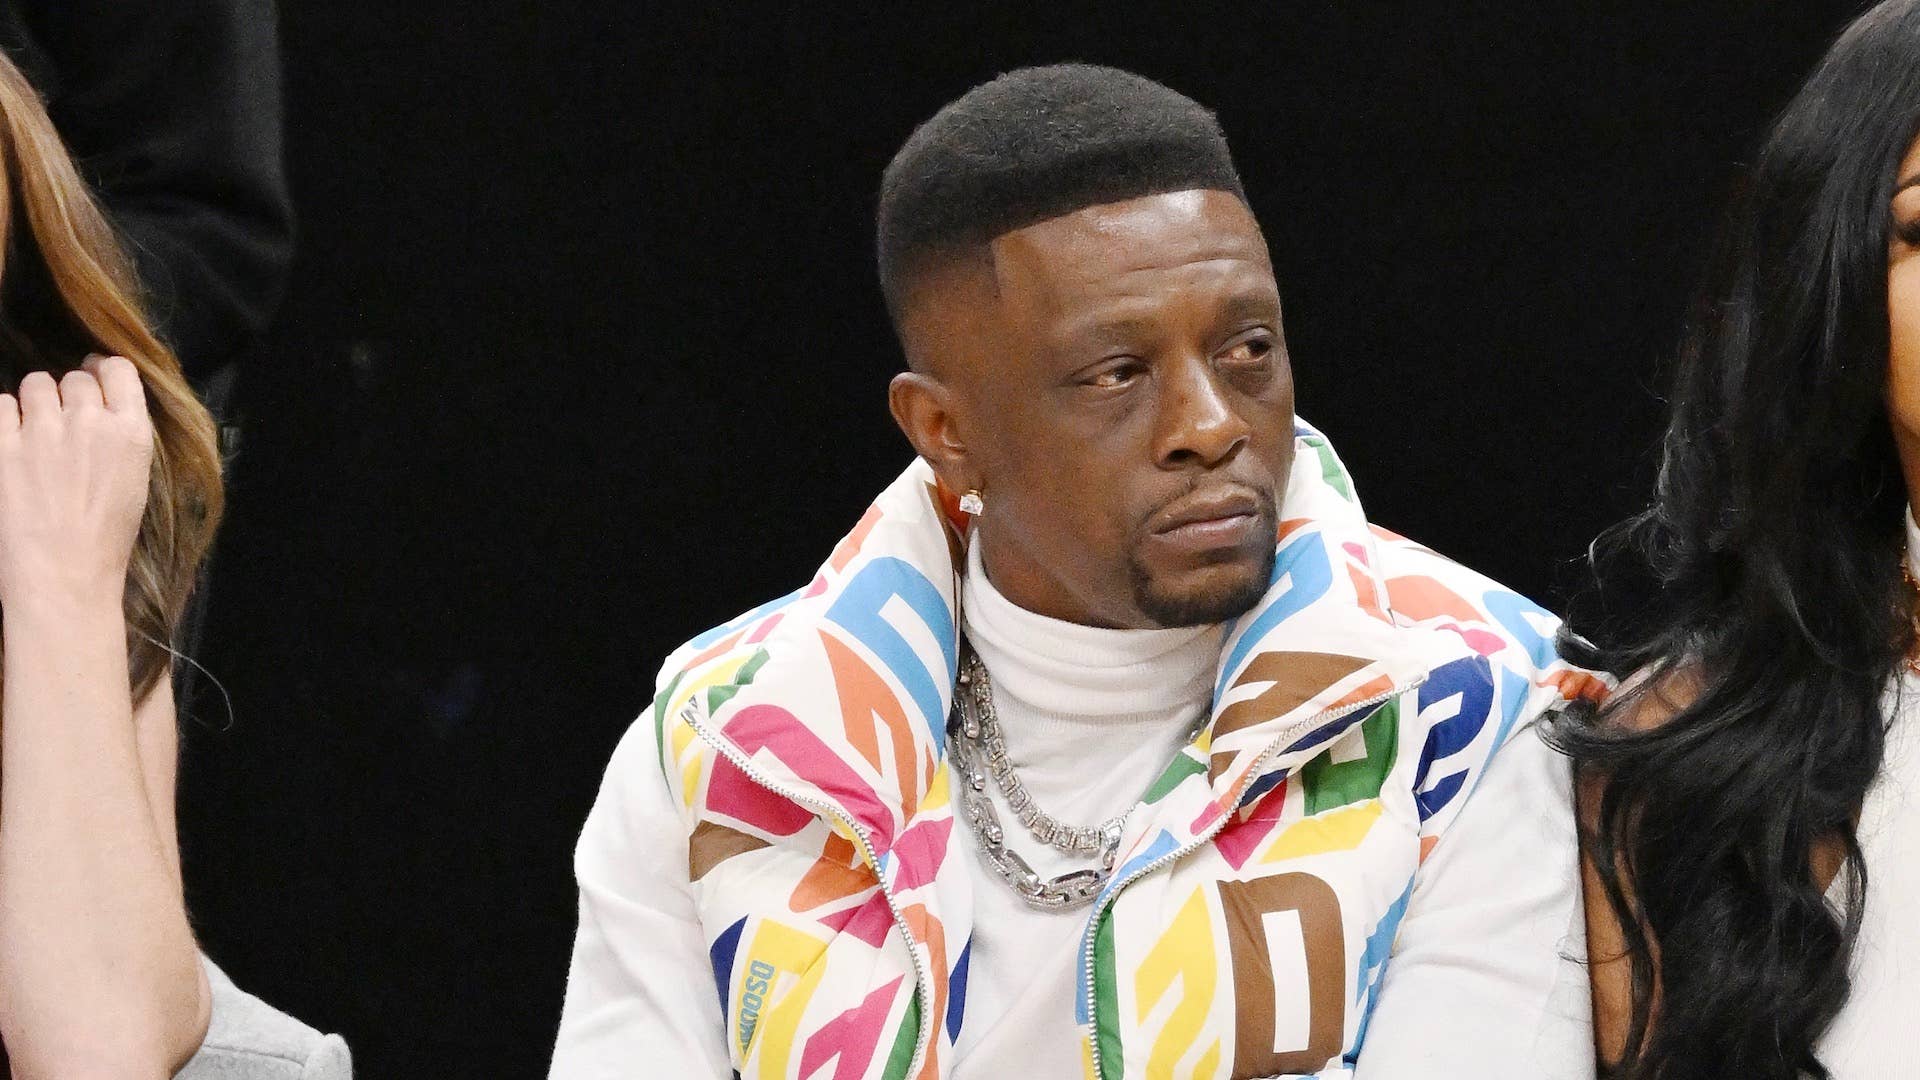 Boosie Badazz Reveals He Charges $40K For Podcast Interviews, Prefers Them Over Club Hostings